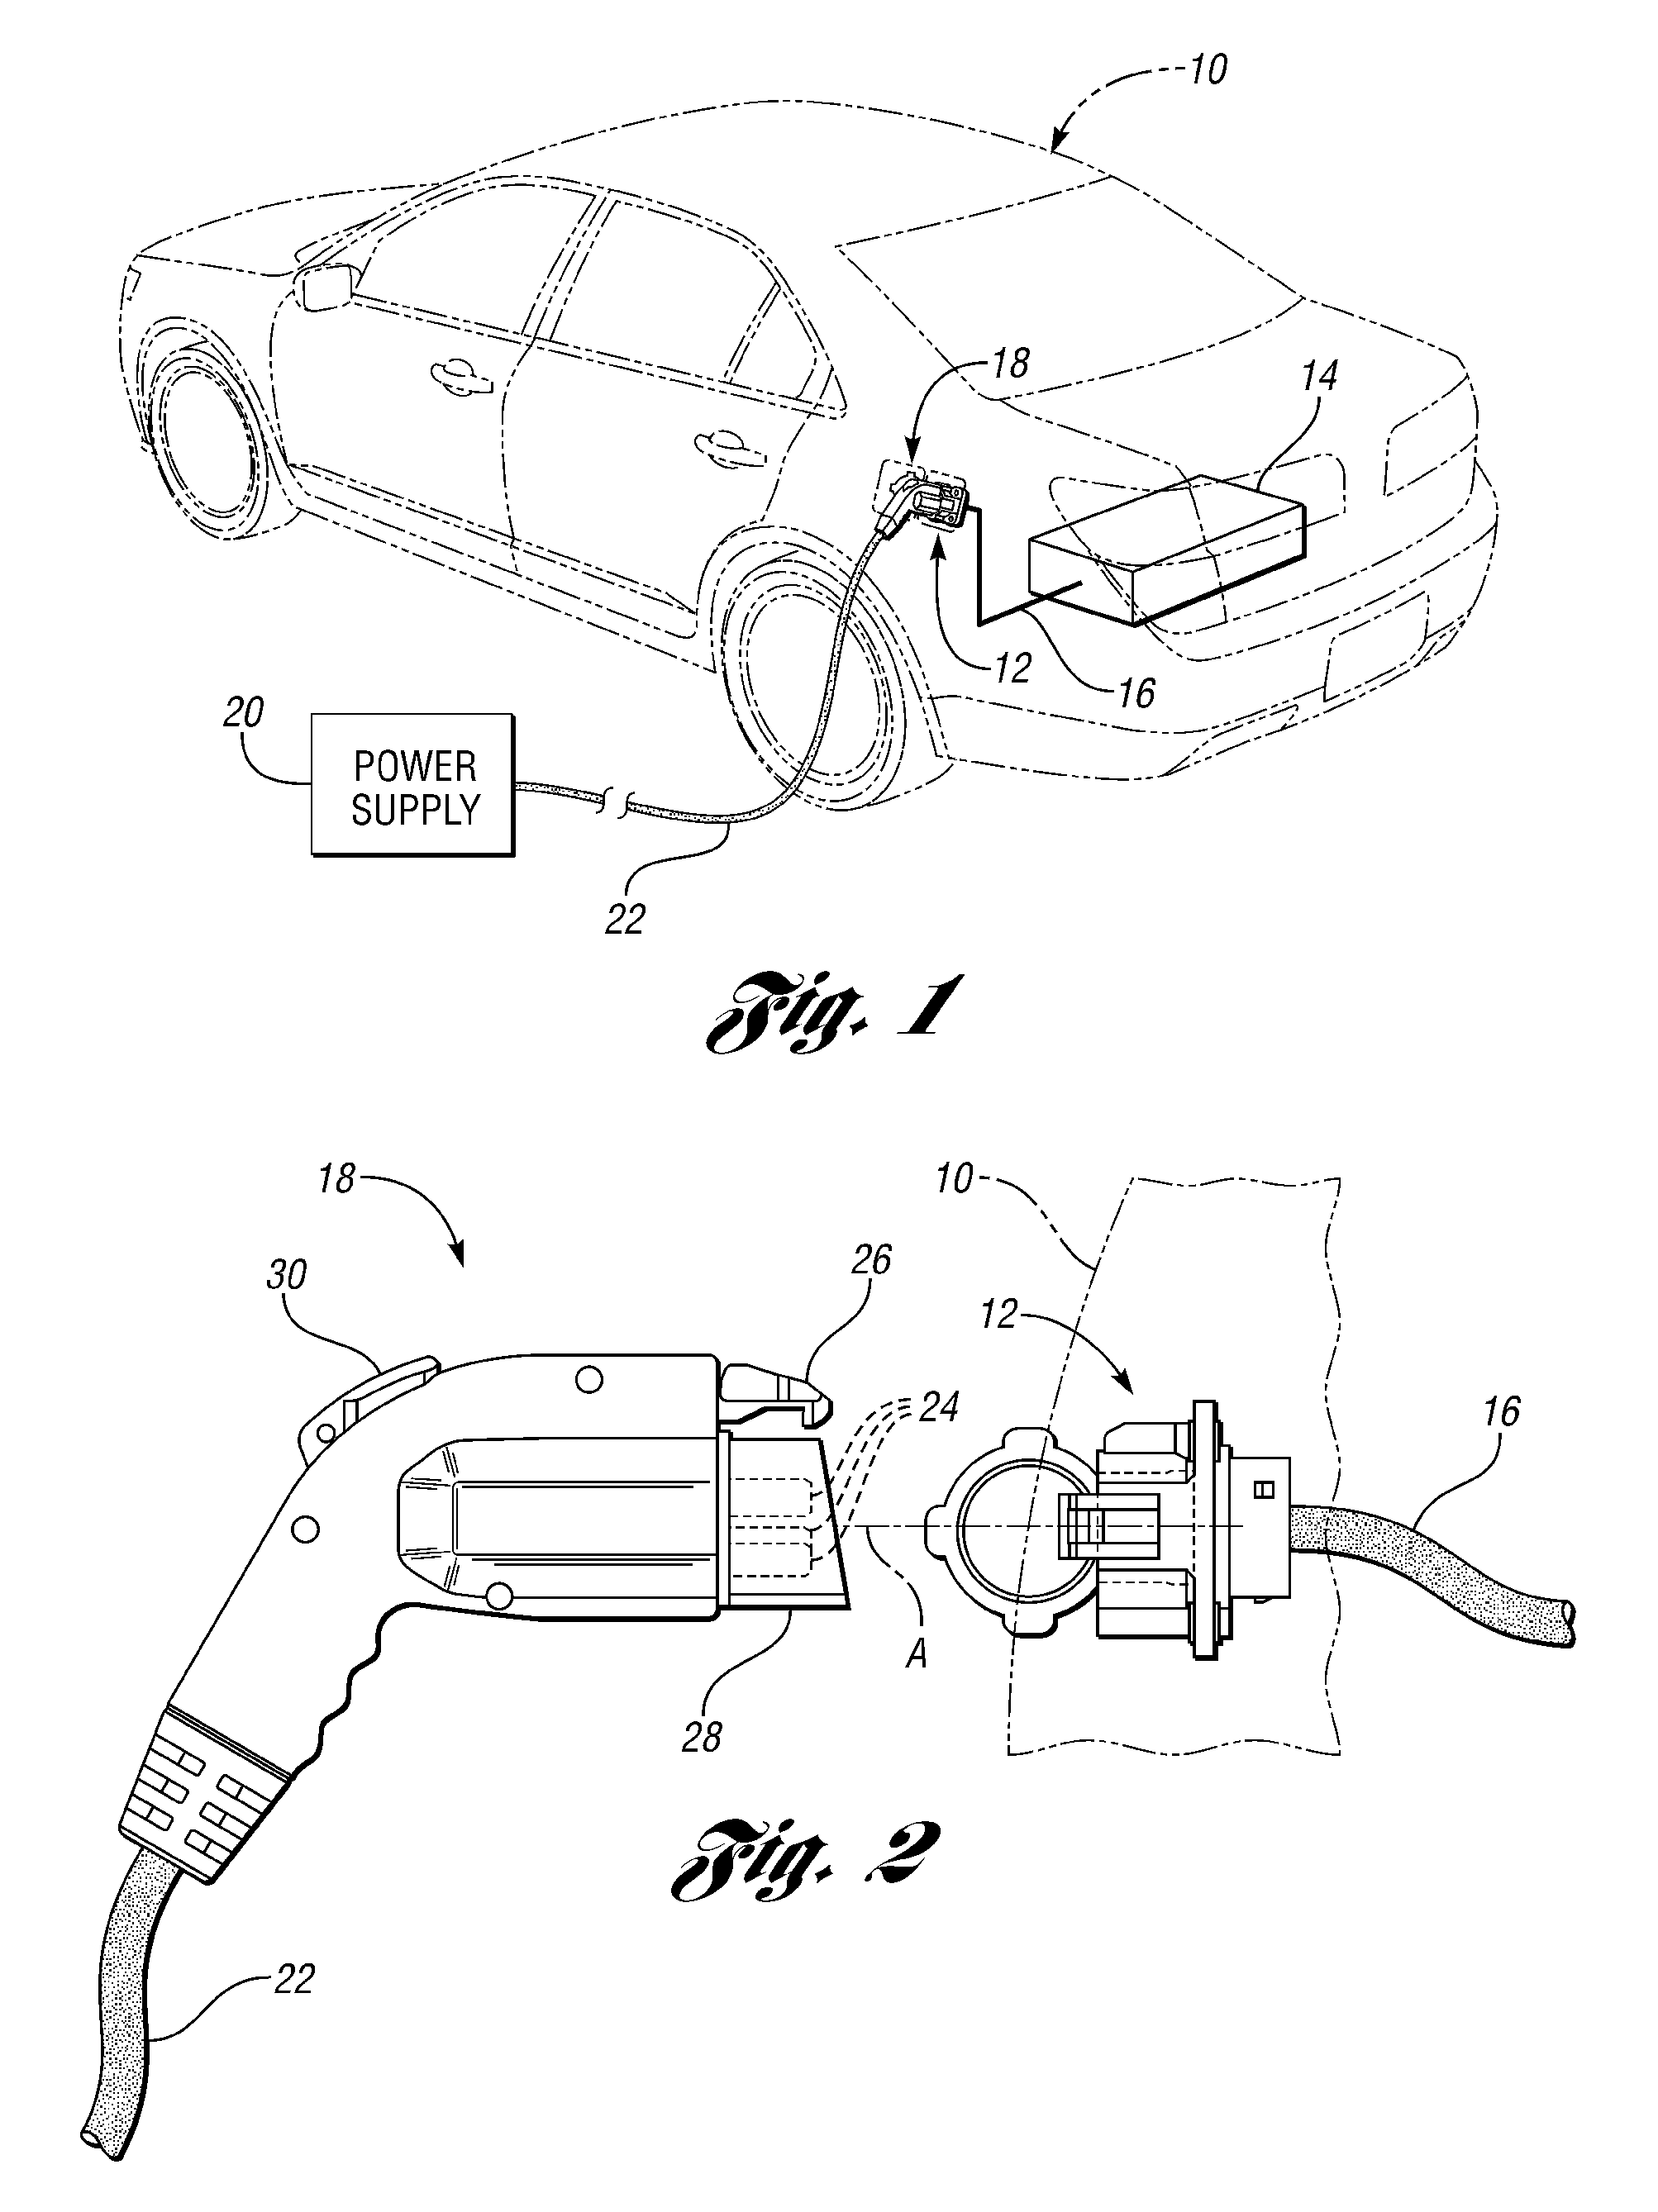 Method and system for preventing disengagement between an electrical plug and a charge port on an electric vehicle